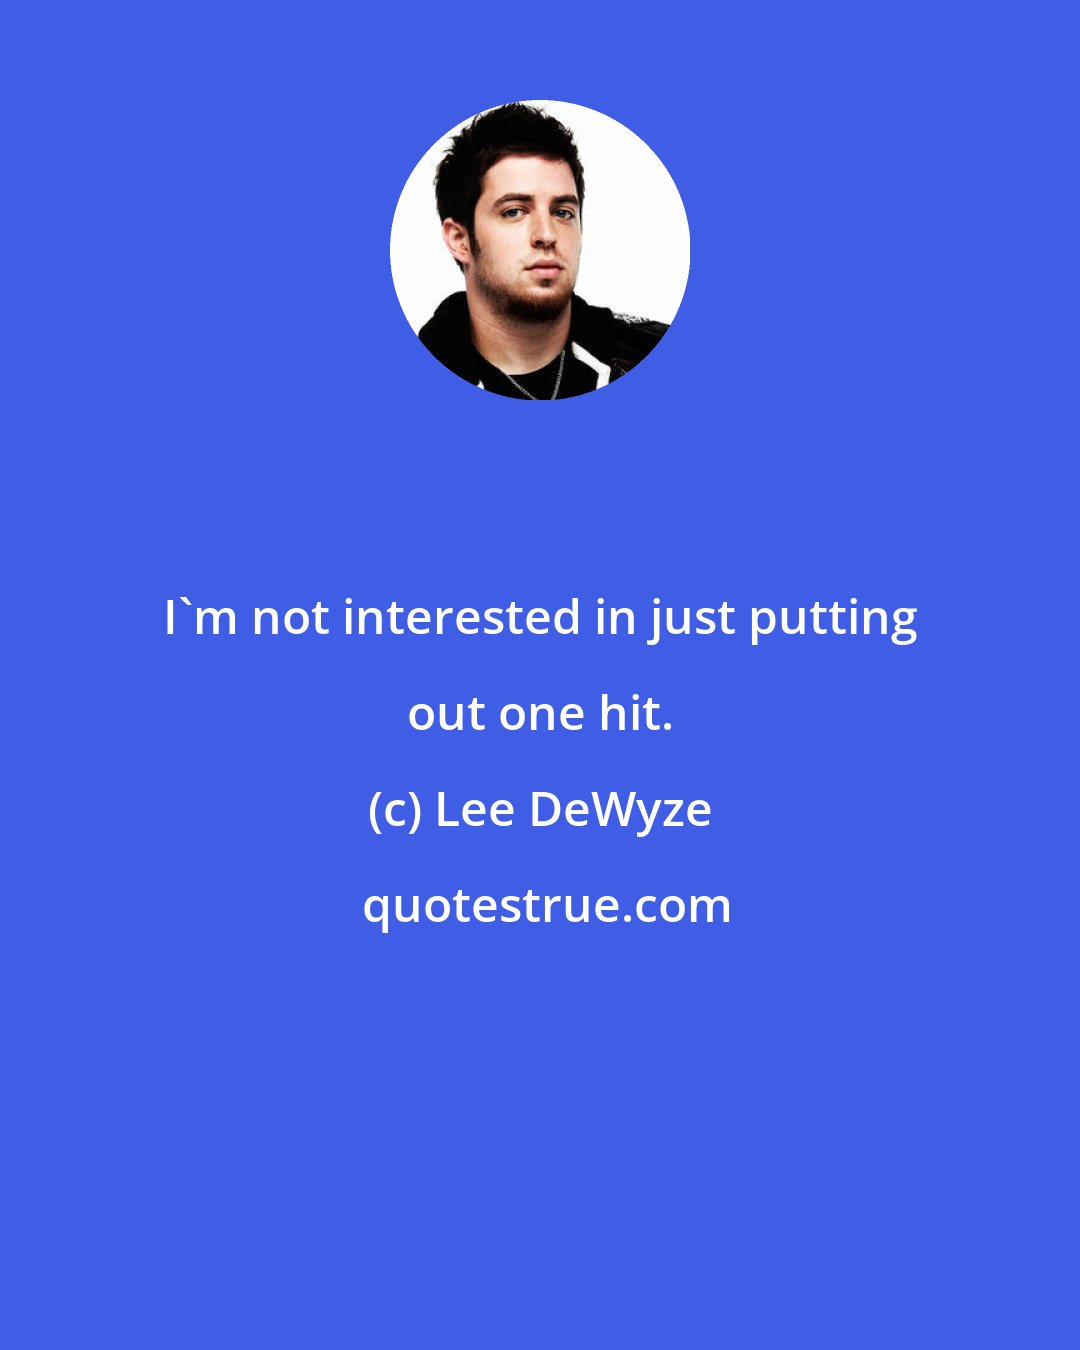 Lee DeWyze: I'm not interested in just putting out one hit.